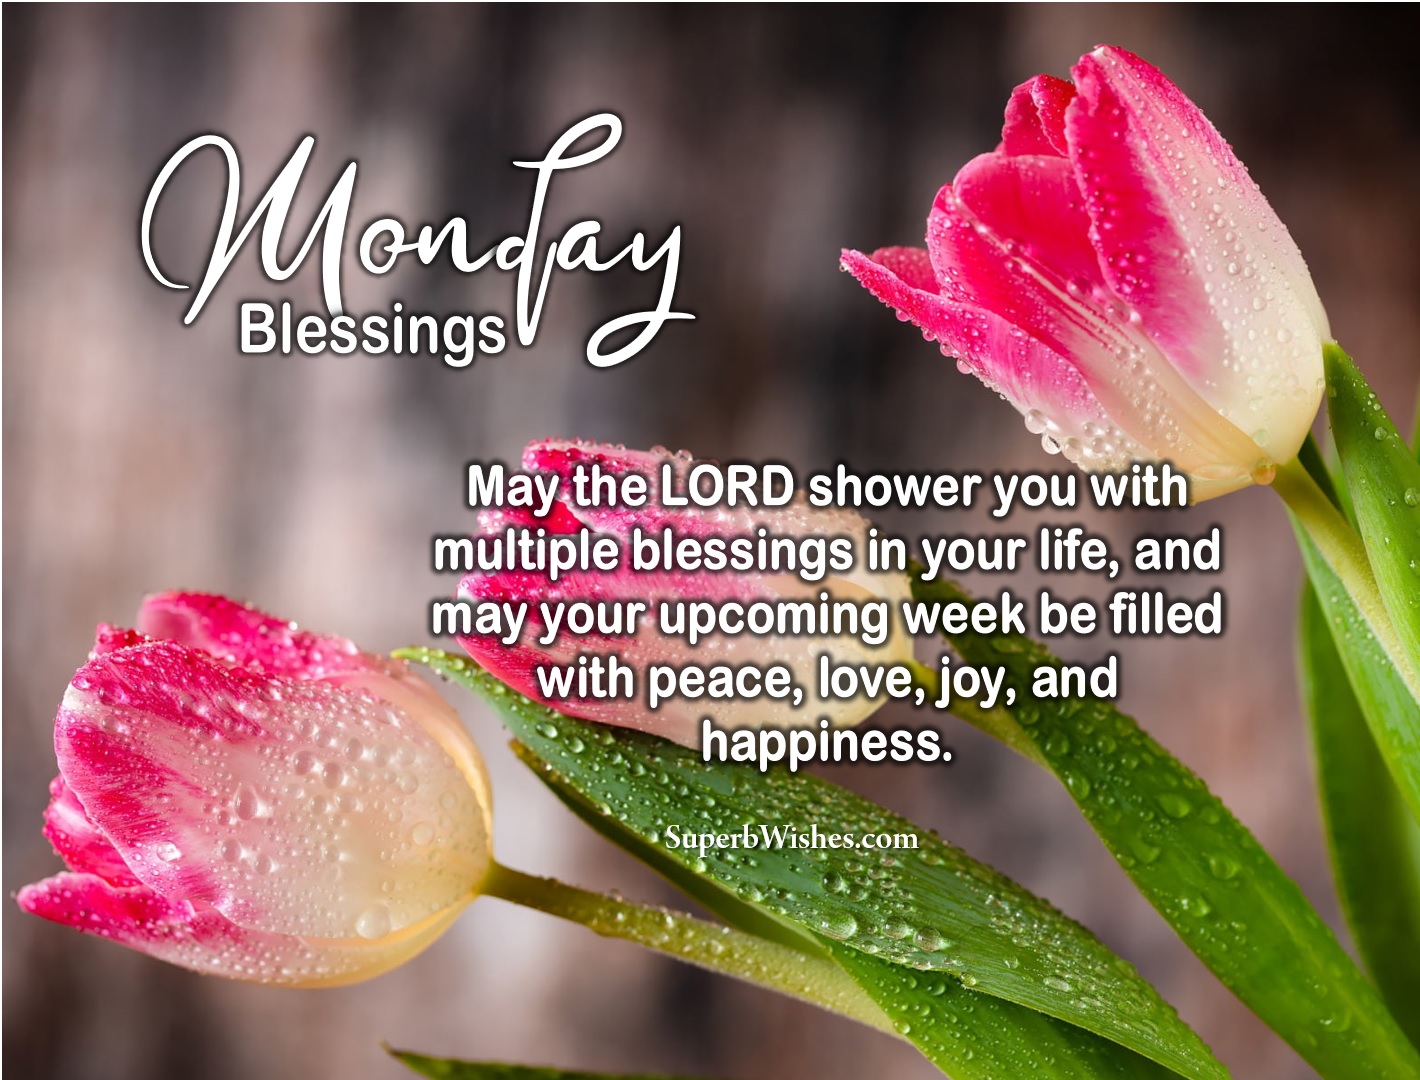 Monday blessings images. Superbwishes.com